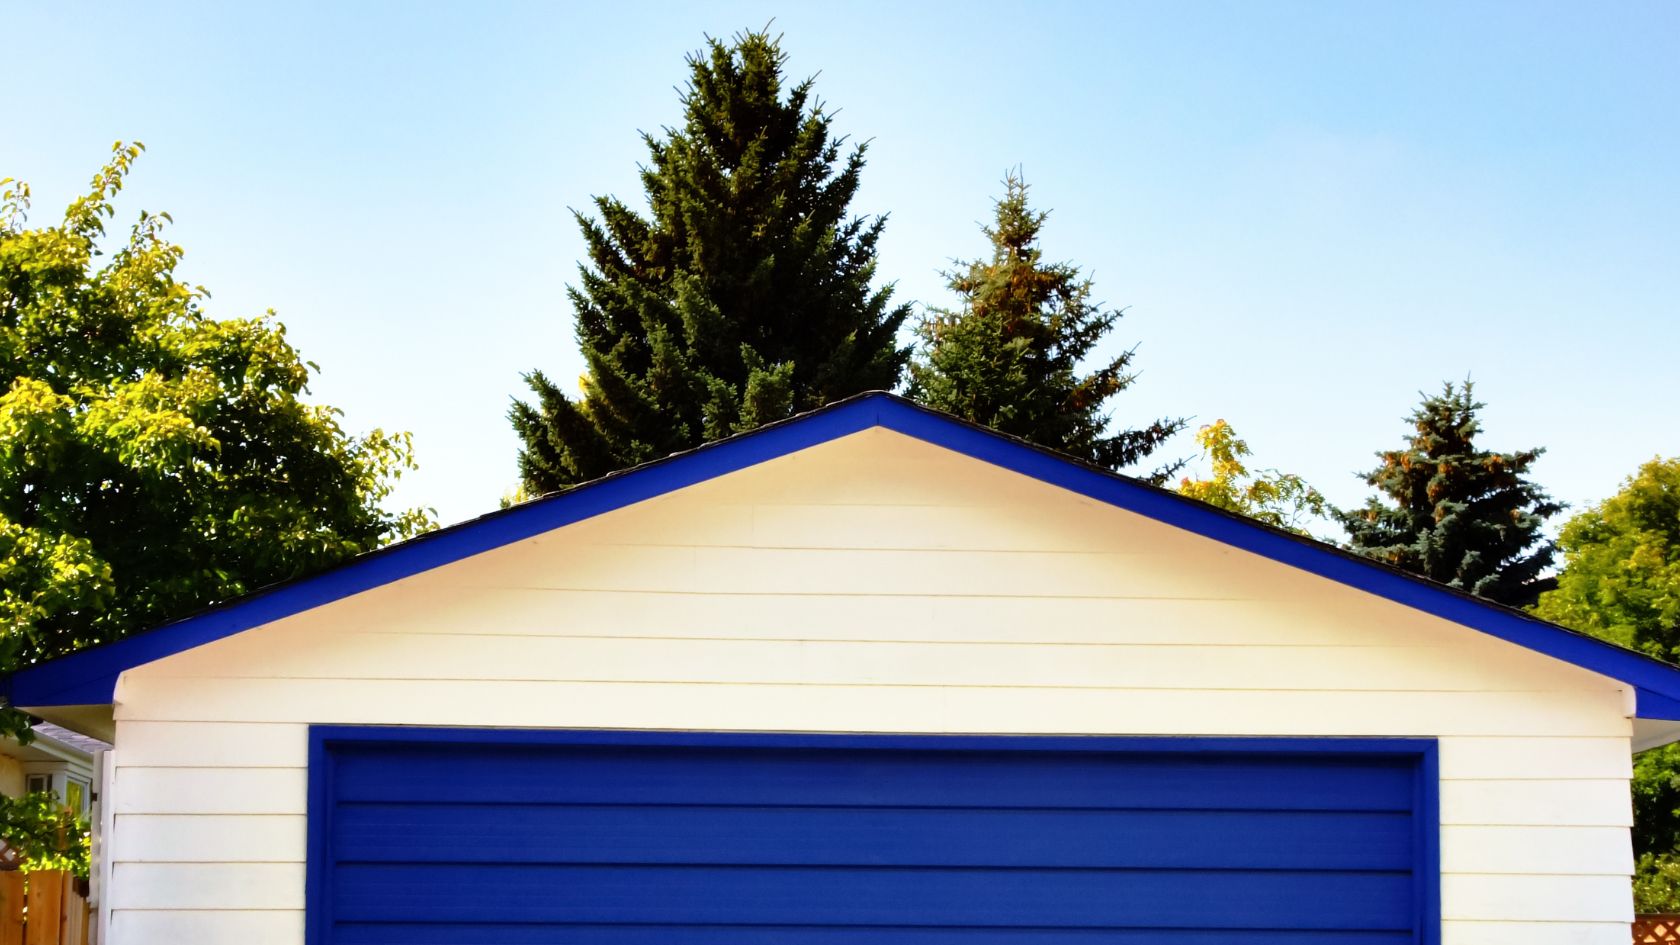 A blue and white garage with trees in the background